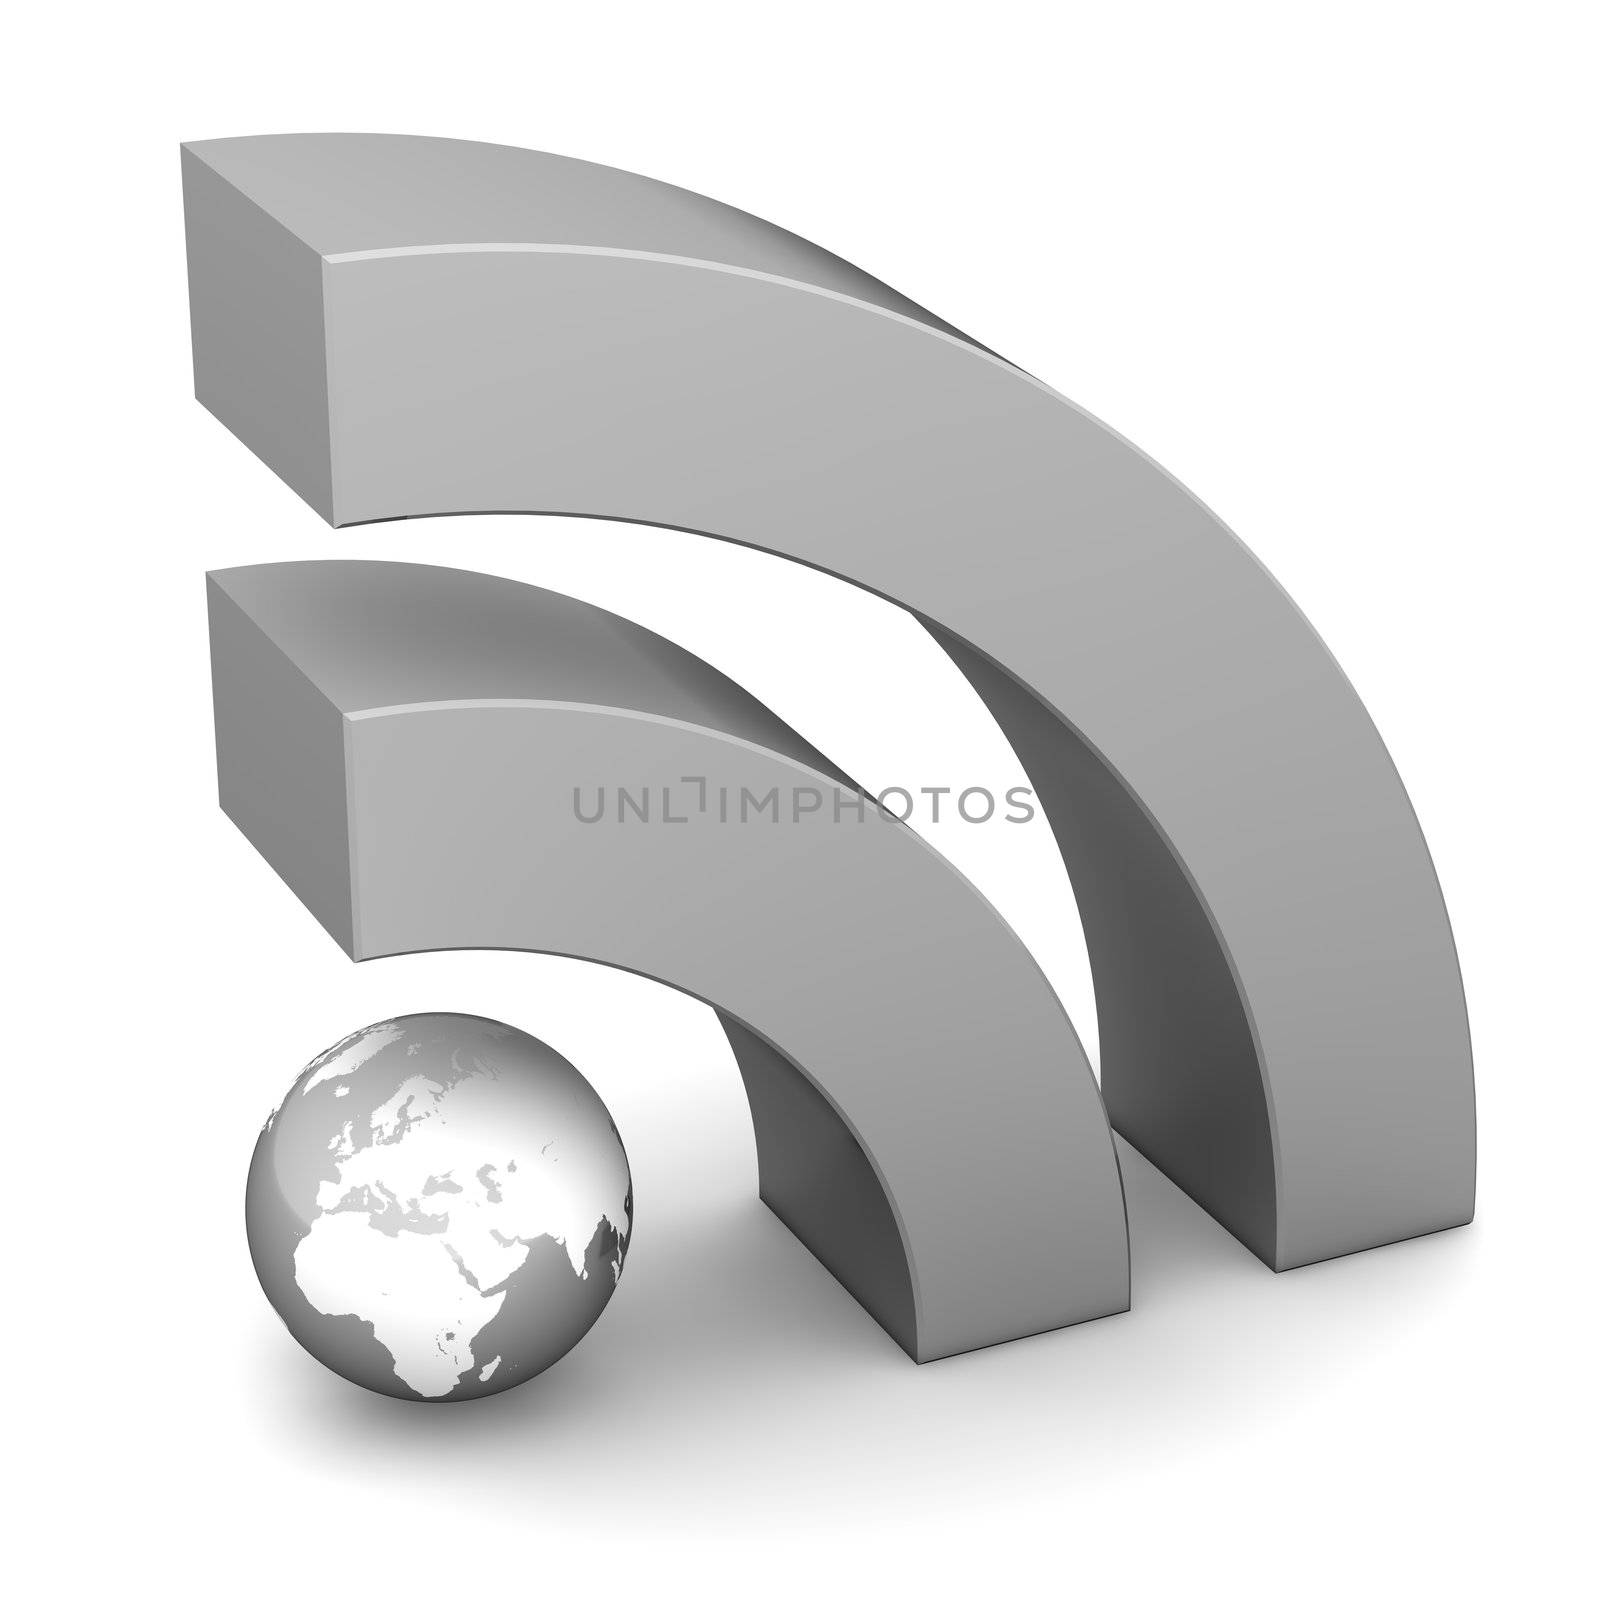 RSS Sign in Metallic Grey by PixBox